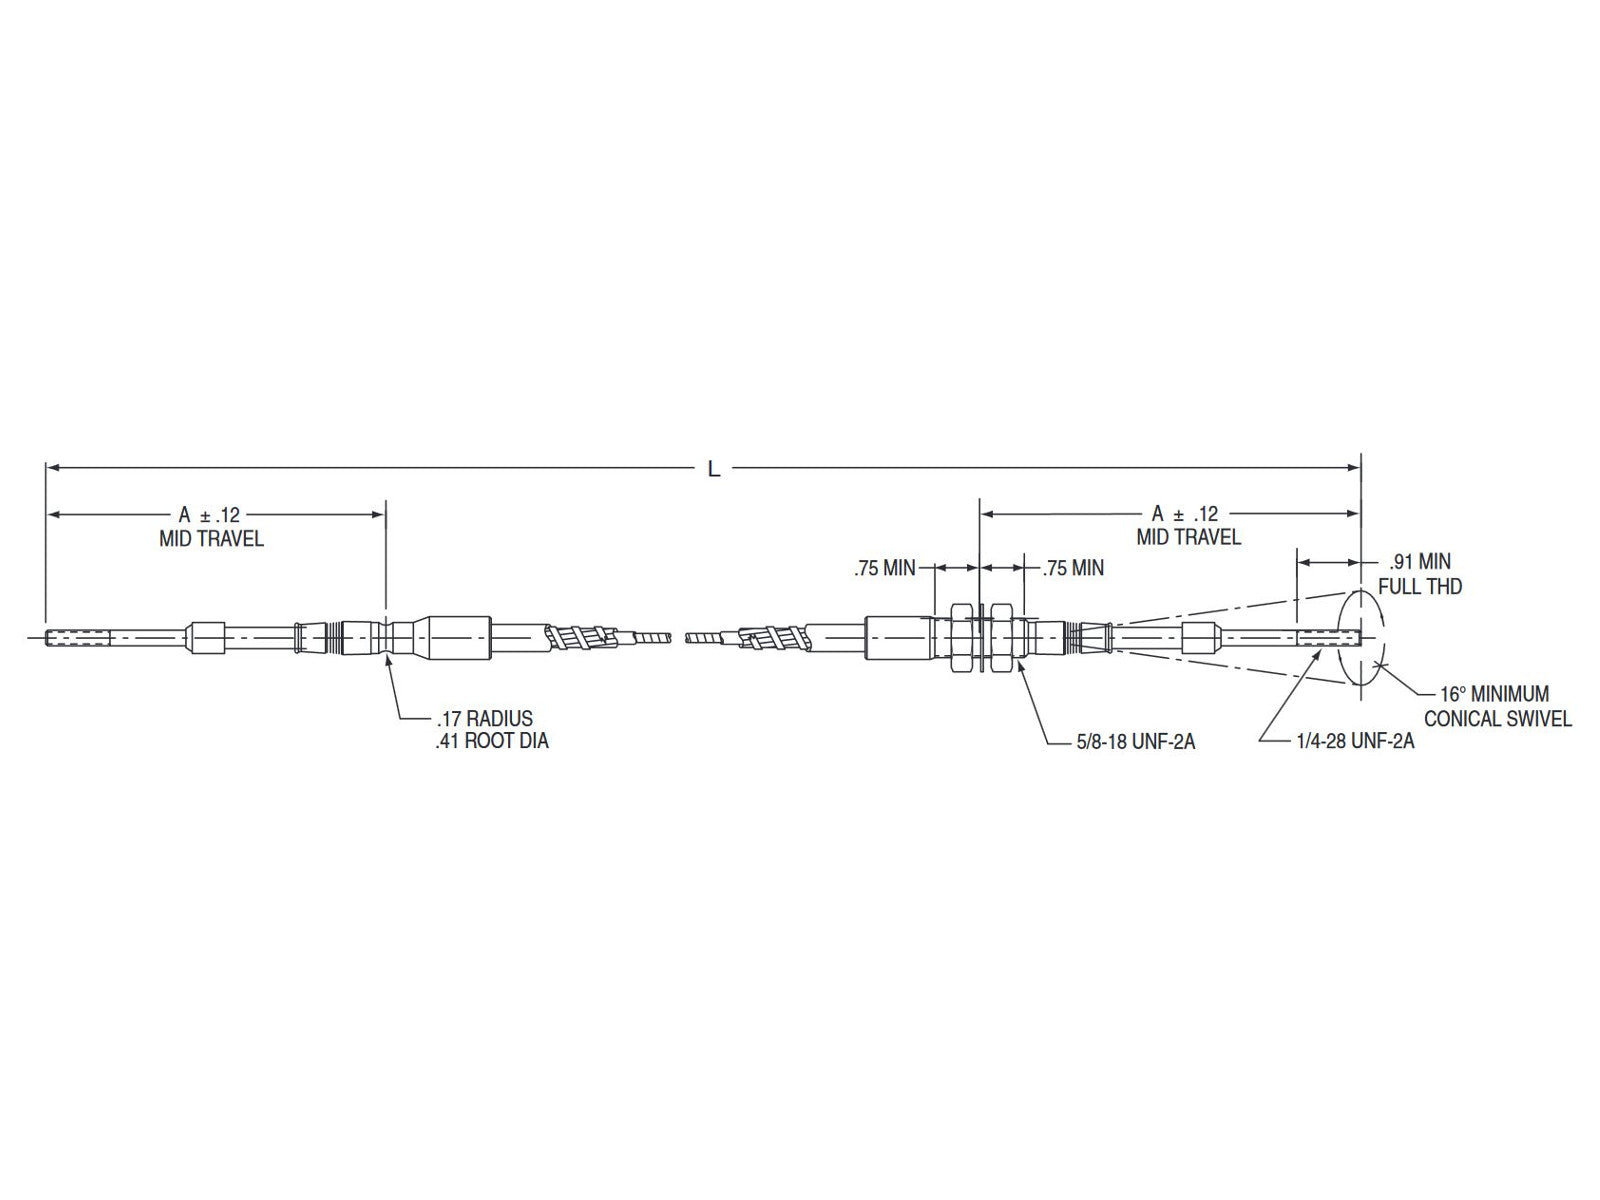 Push Pull Threaded/Grooved Utility Cable Diagram